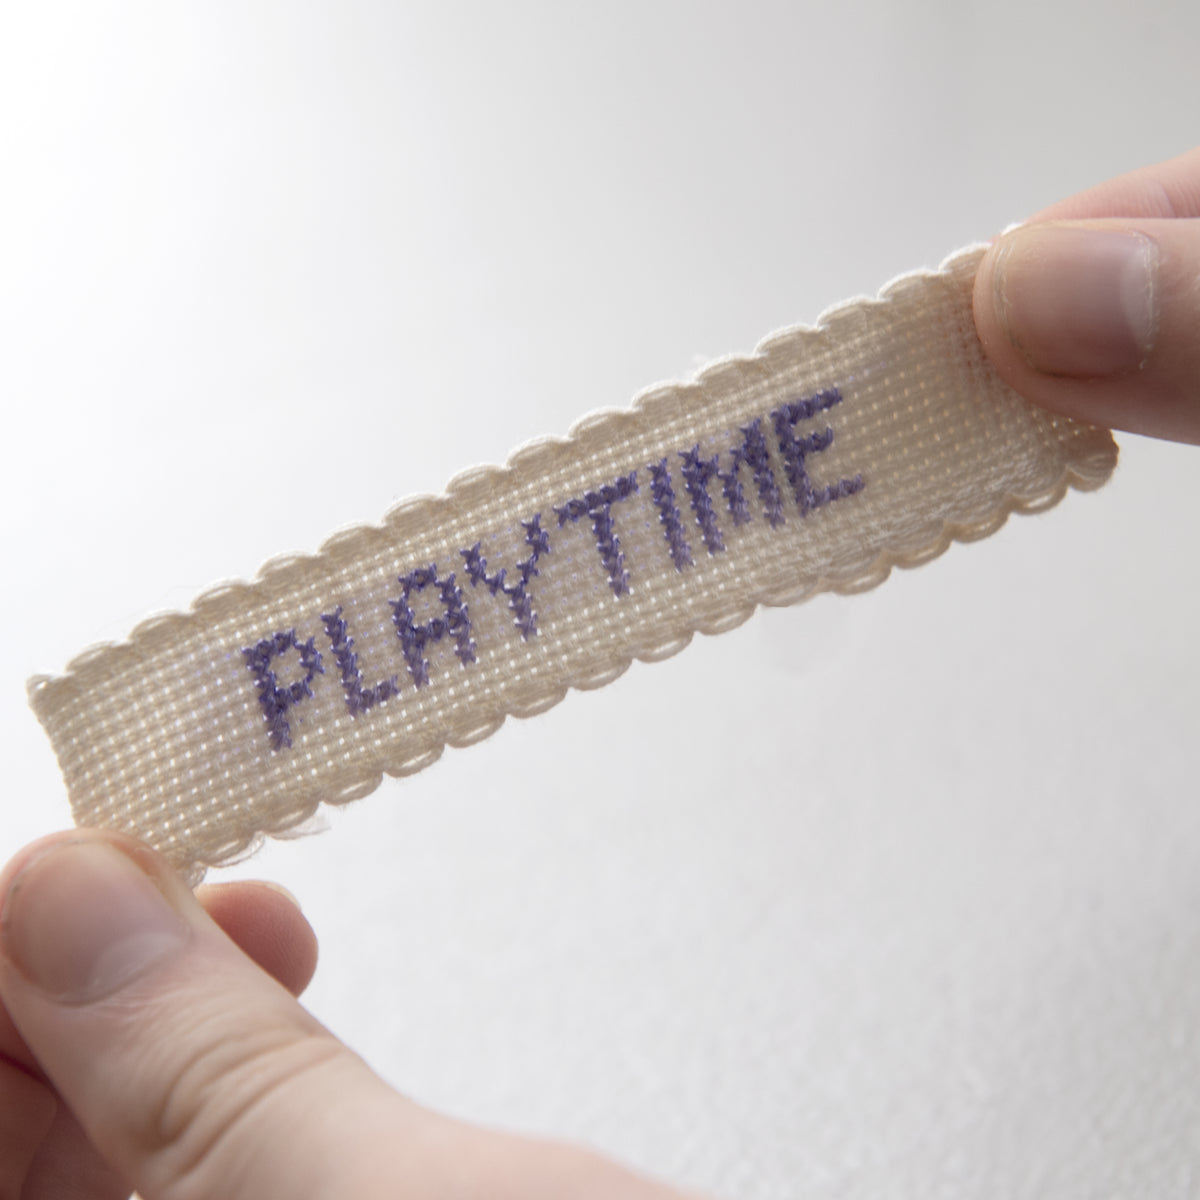 Just To Say 'PLAYTIME' Cross Stitch Secret Message